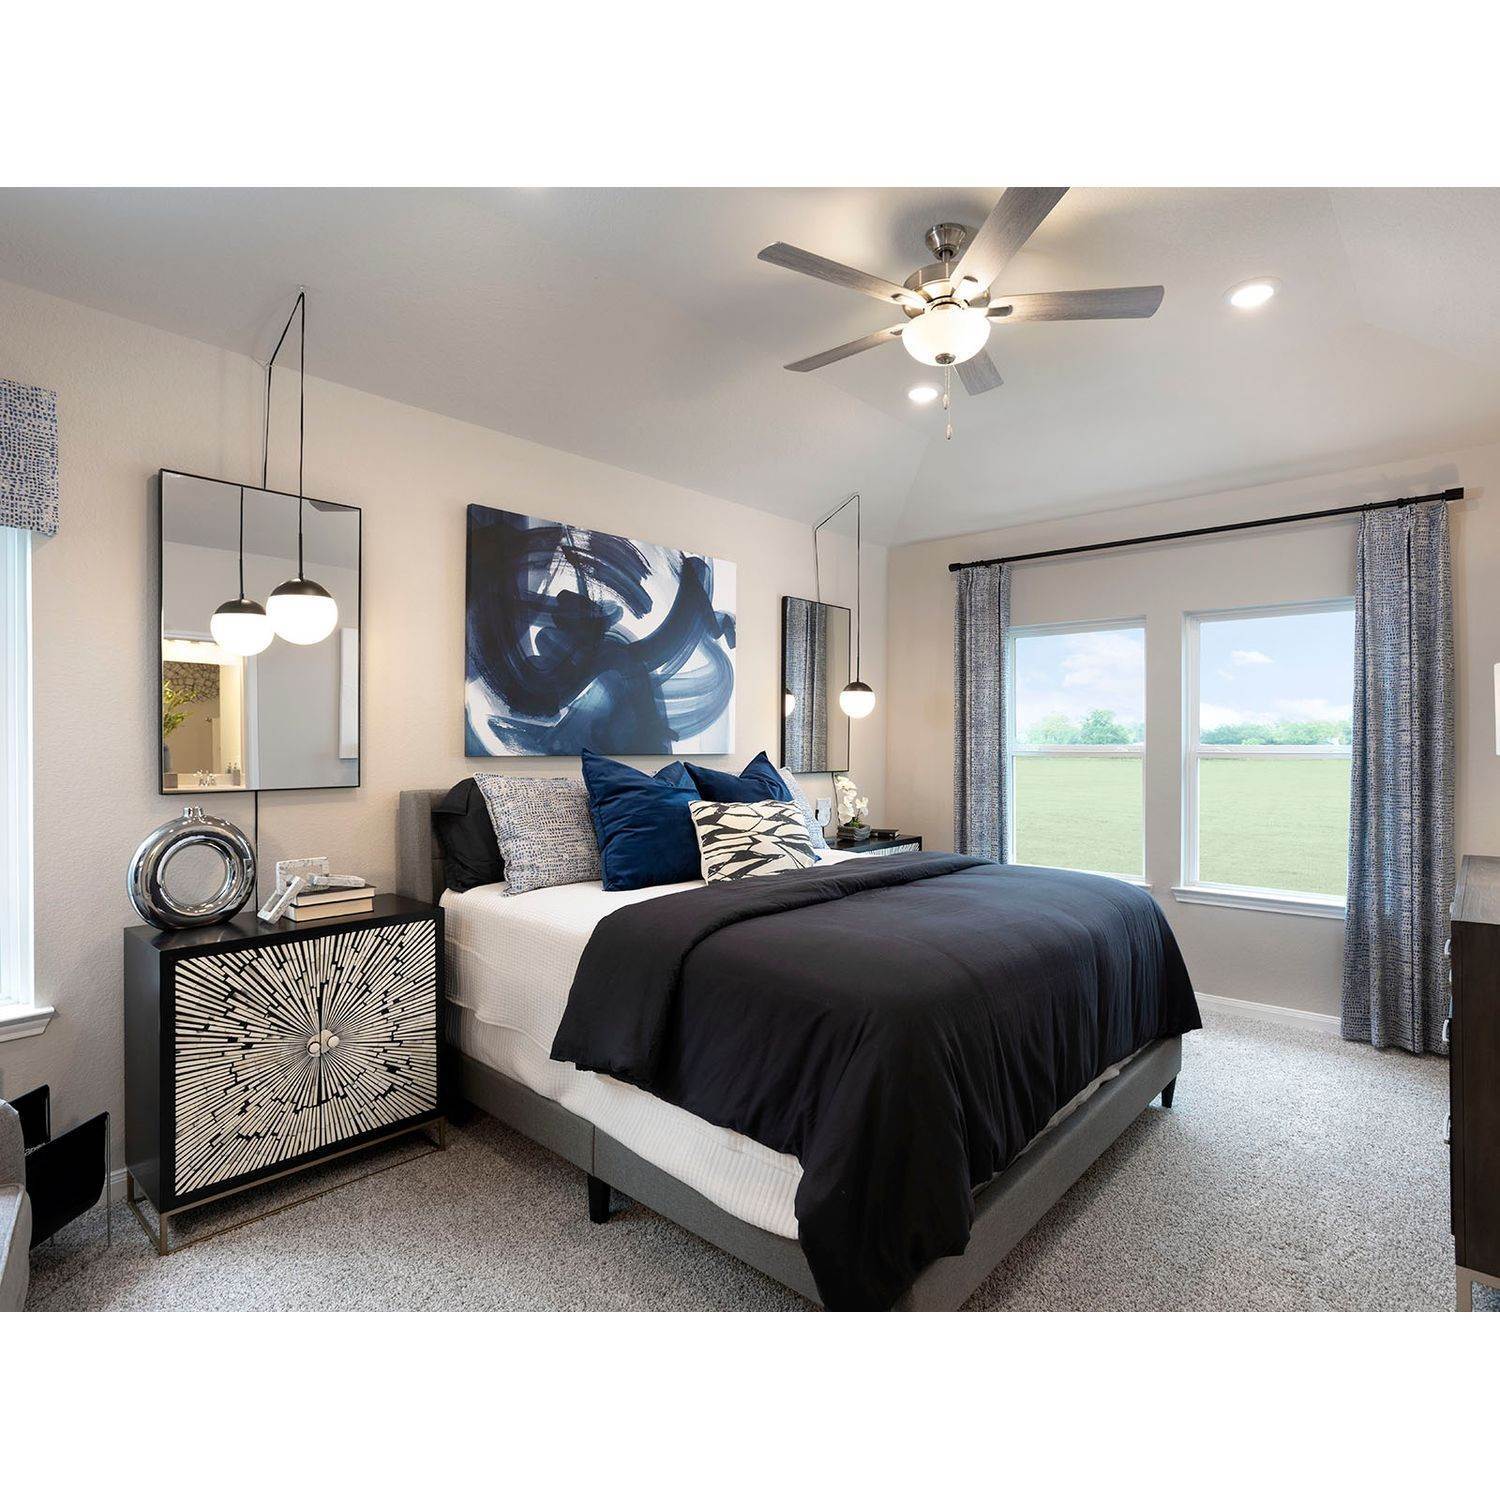 2. Dunvale Village - Townhome Collection building at 3107 Moontide Ln., Houston, TX 77063